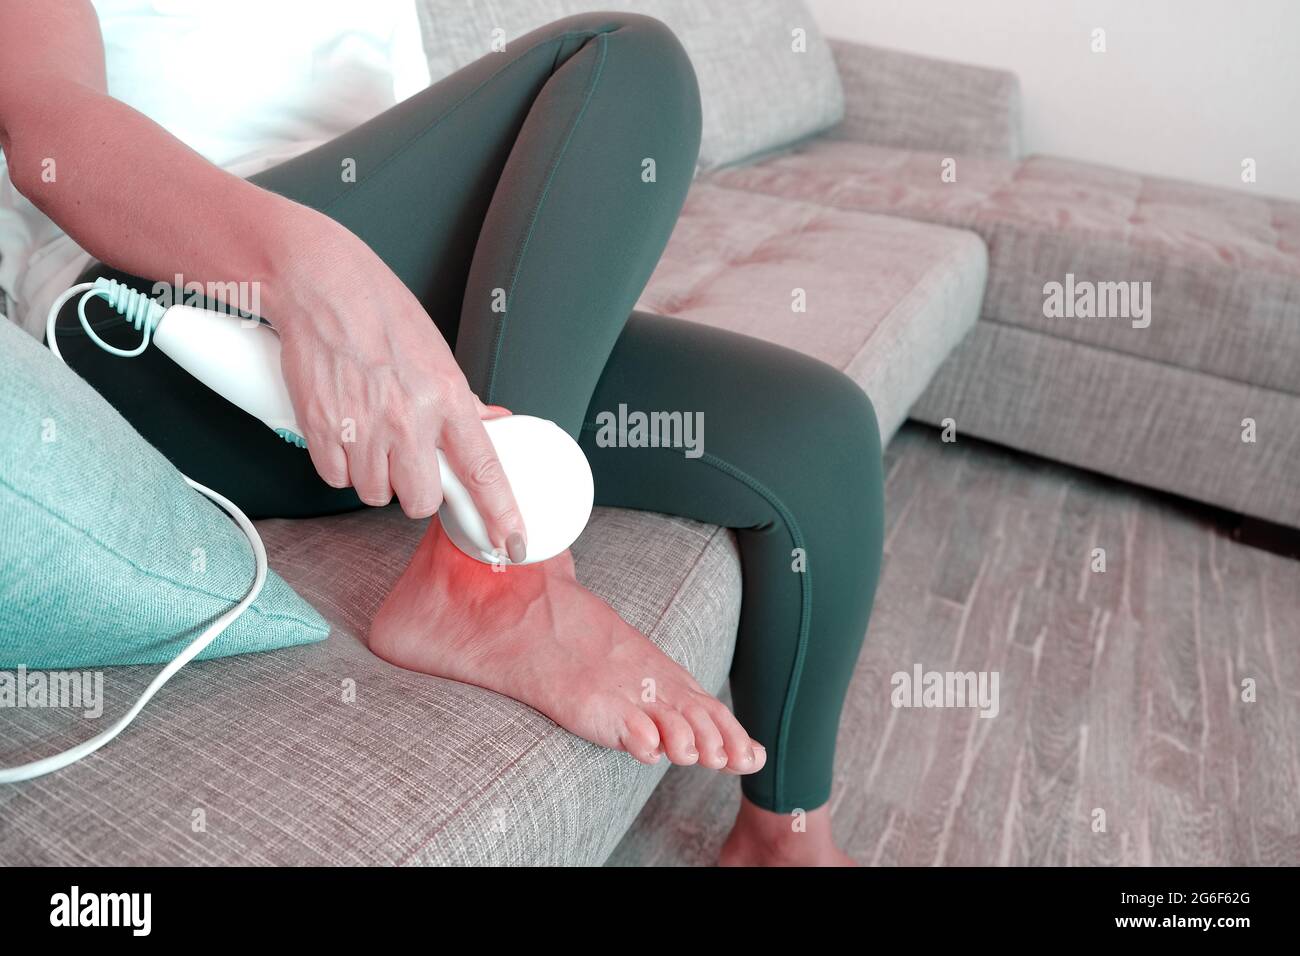 Treatment of joint inflammation.Infrared massage device for the body, for muscle pain, sprains, circulatory disorders and fatigue phenomena Stock Photo